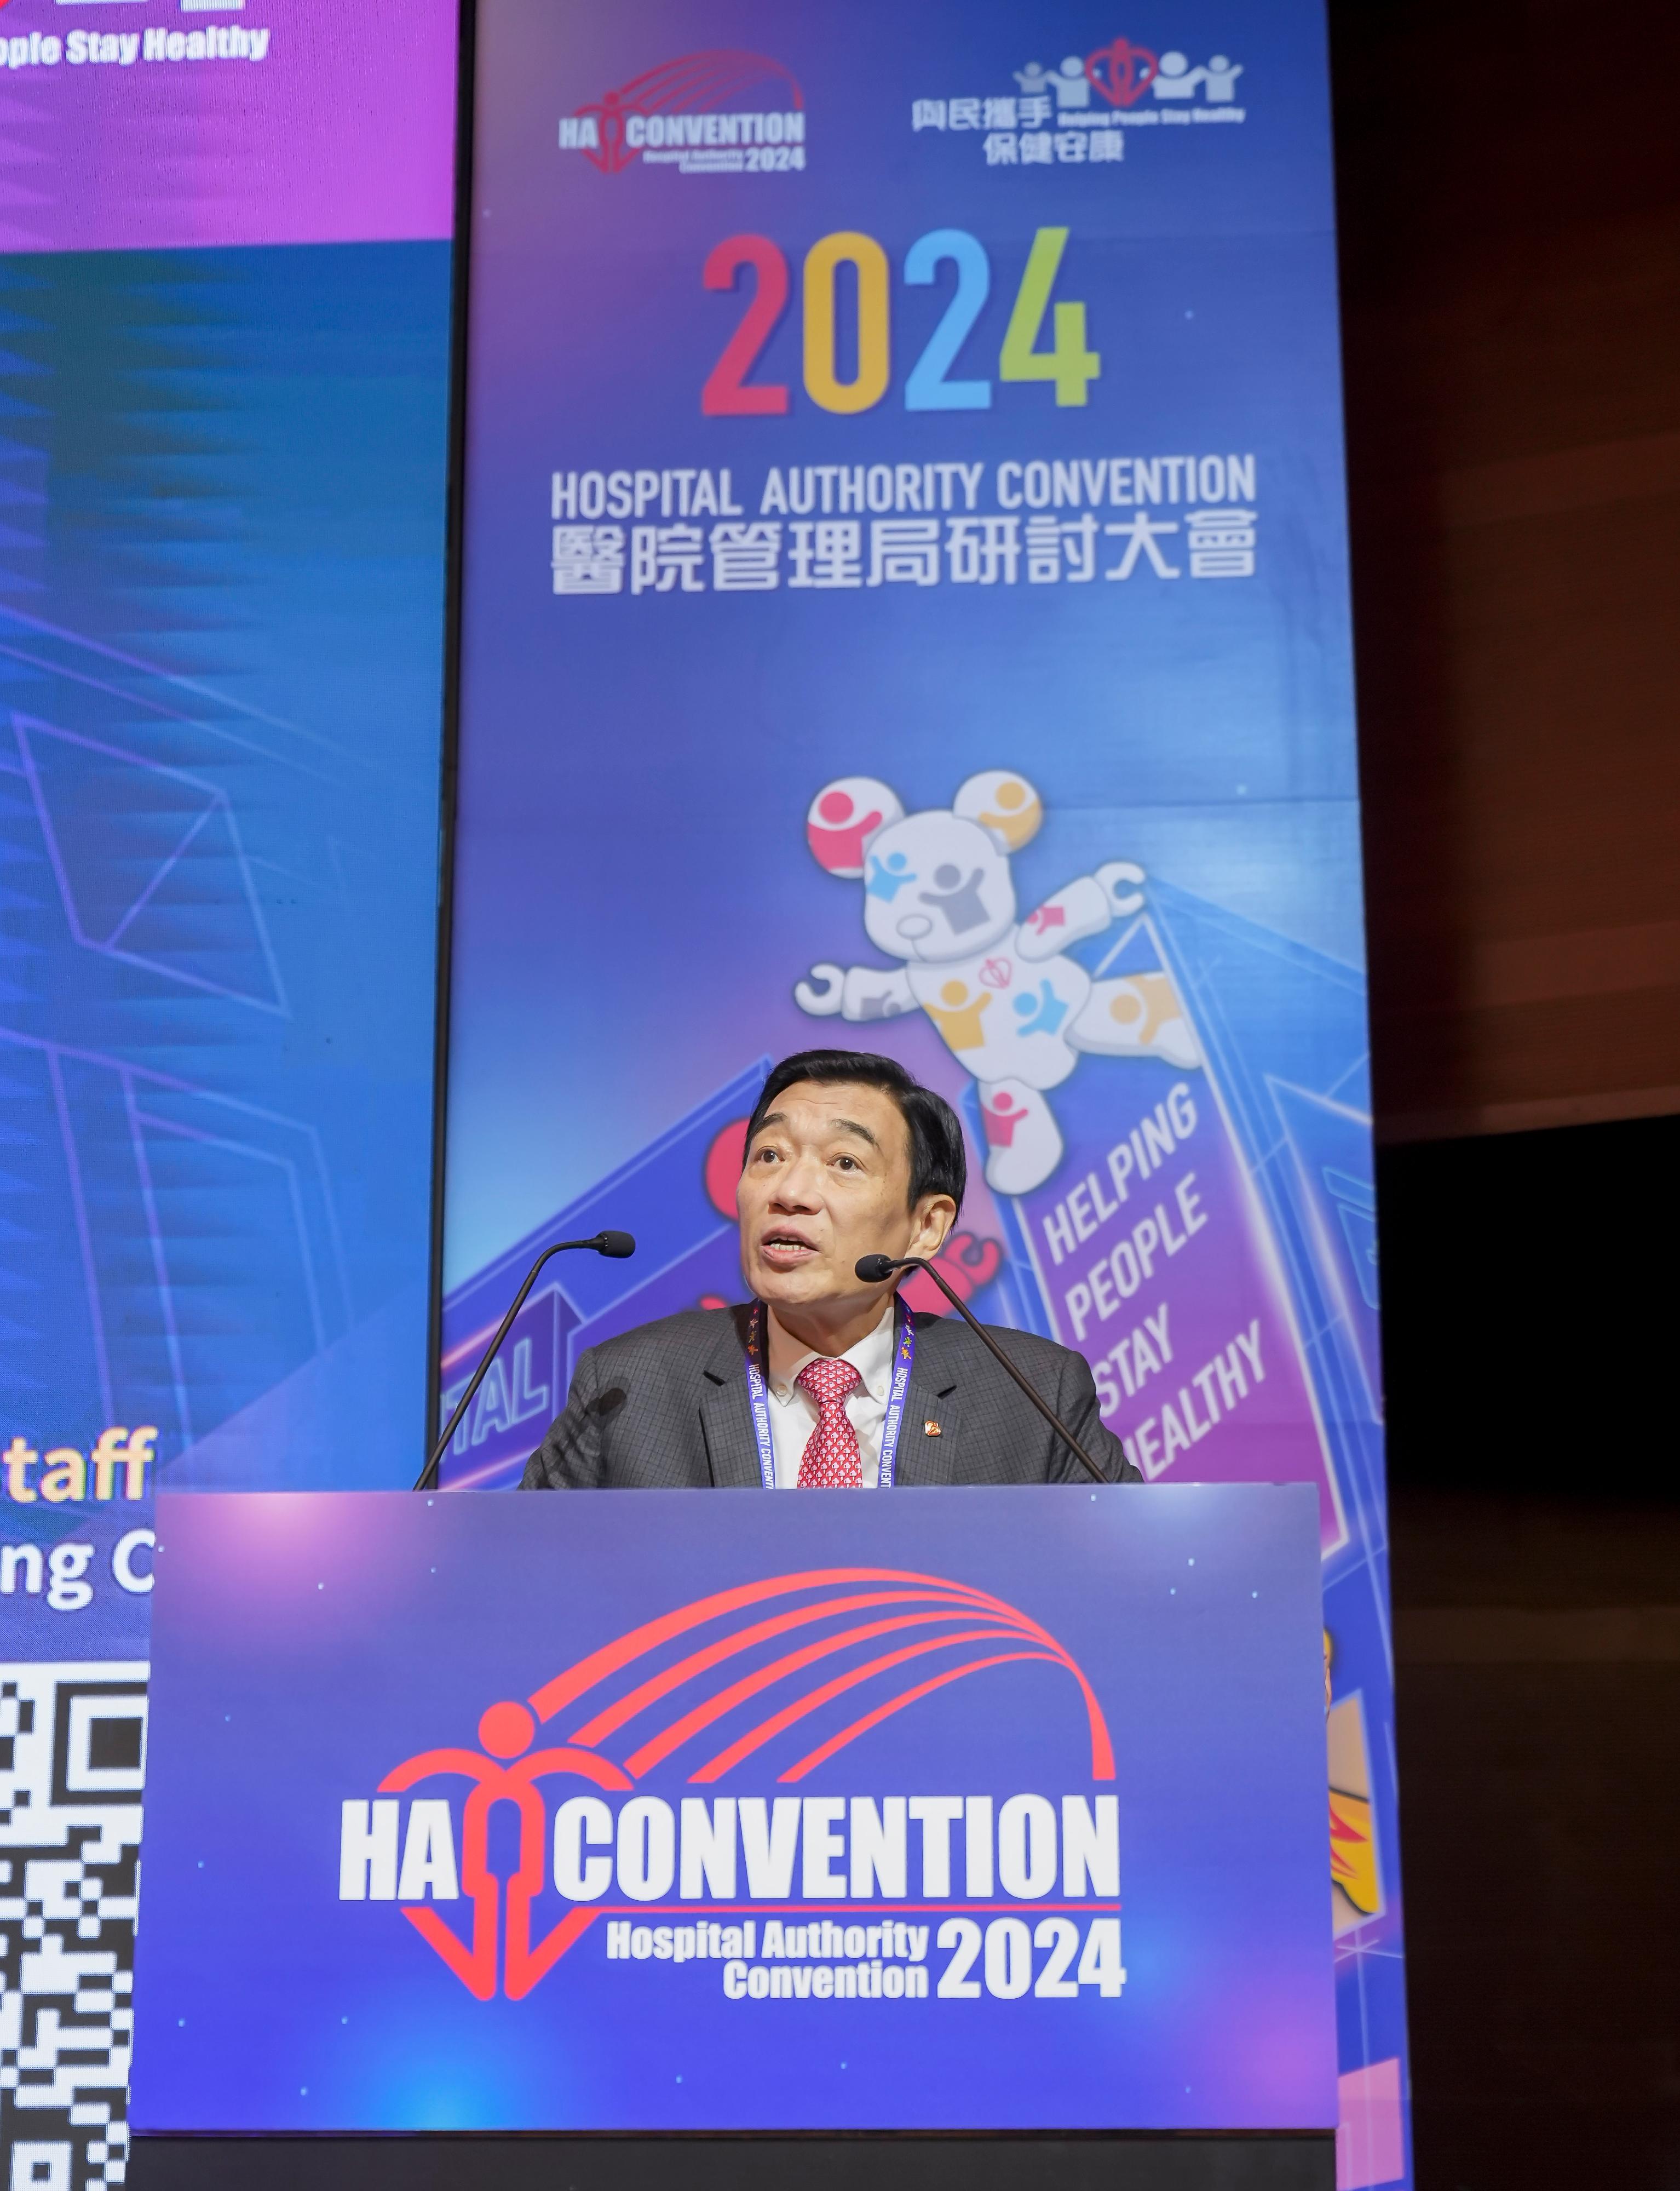 The Hospital Authority (HA) Convention 2024 is being held in both physical and virtual formats today and tomorrow (May 16 and 17). Photo shows the HA Chairman, Mr Henry Fan, delivering a welcome address at the opening ceremony of the Convention.